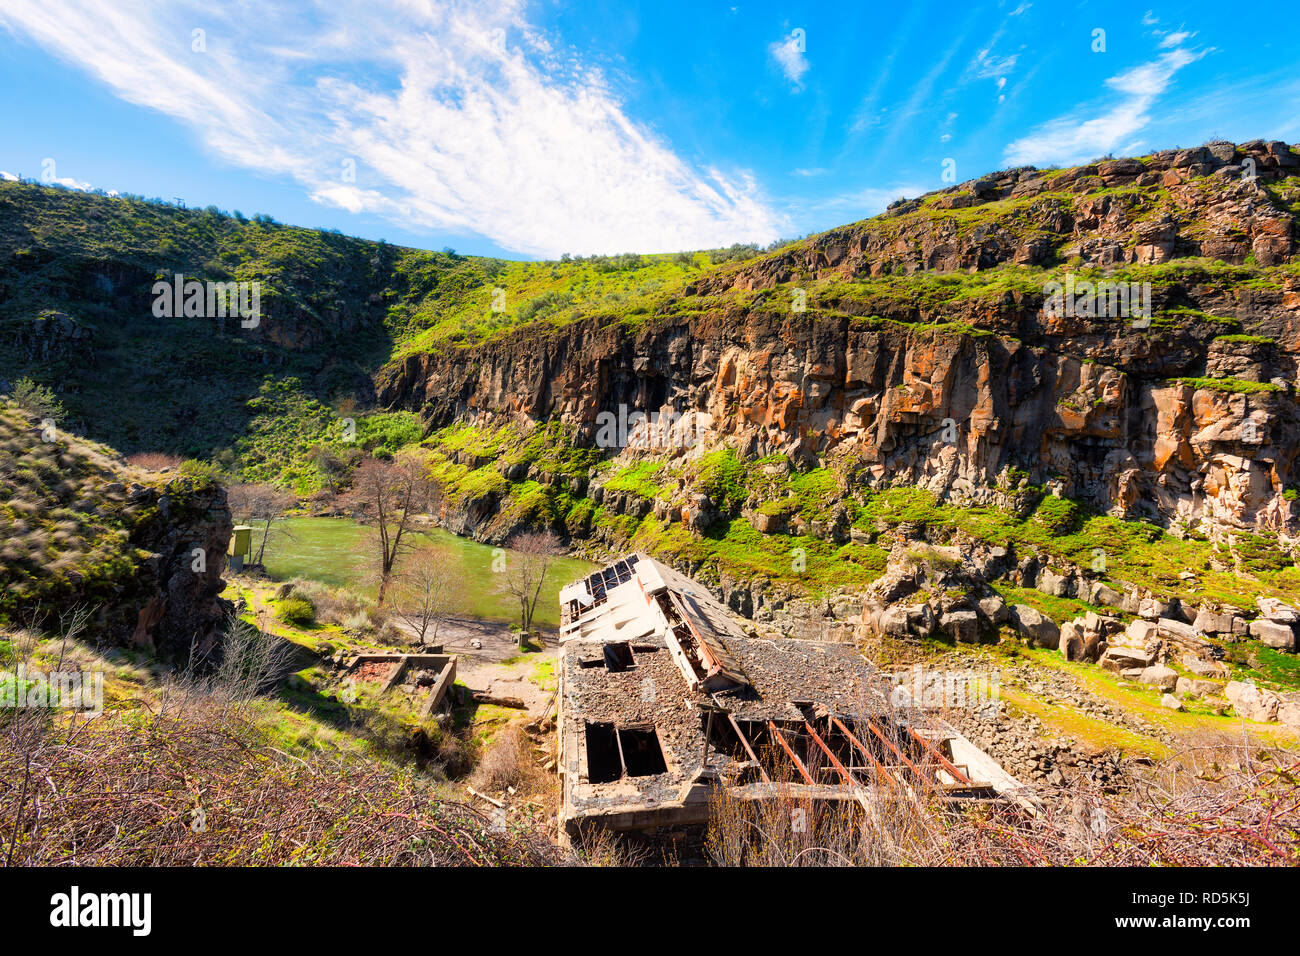 Looking down at White River is a wild and scenic river canyon where an decaying hydropower plant sits, built in 1910 and abandoned in 1960. Stock Photo